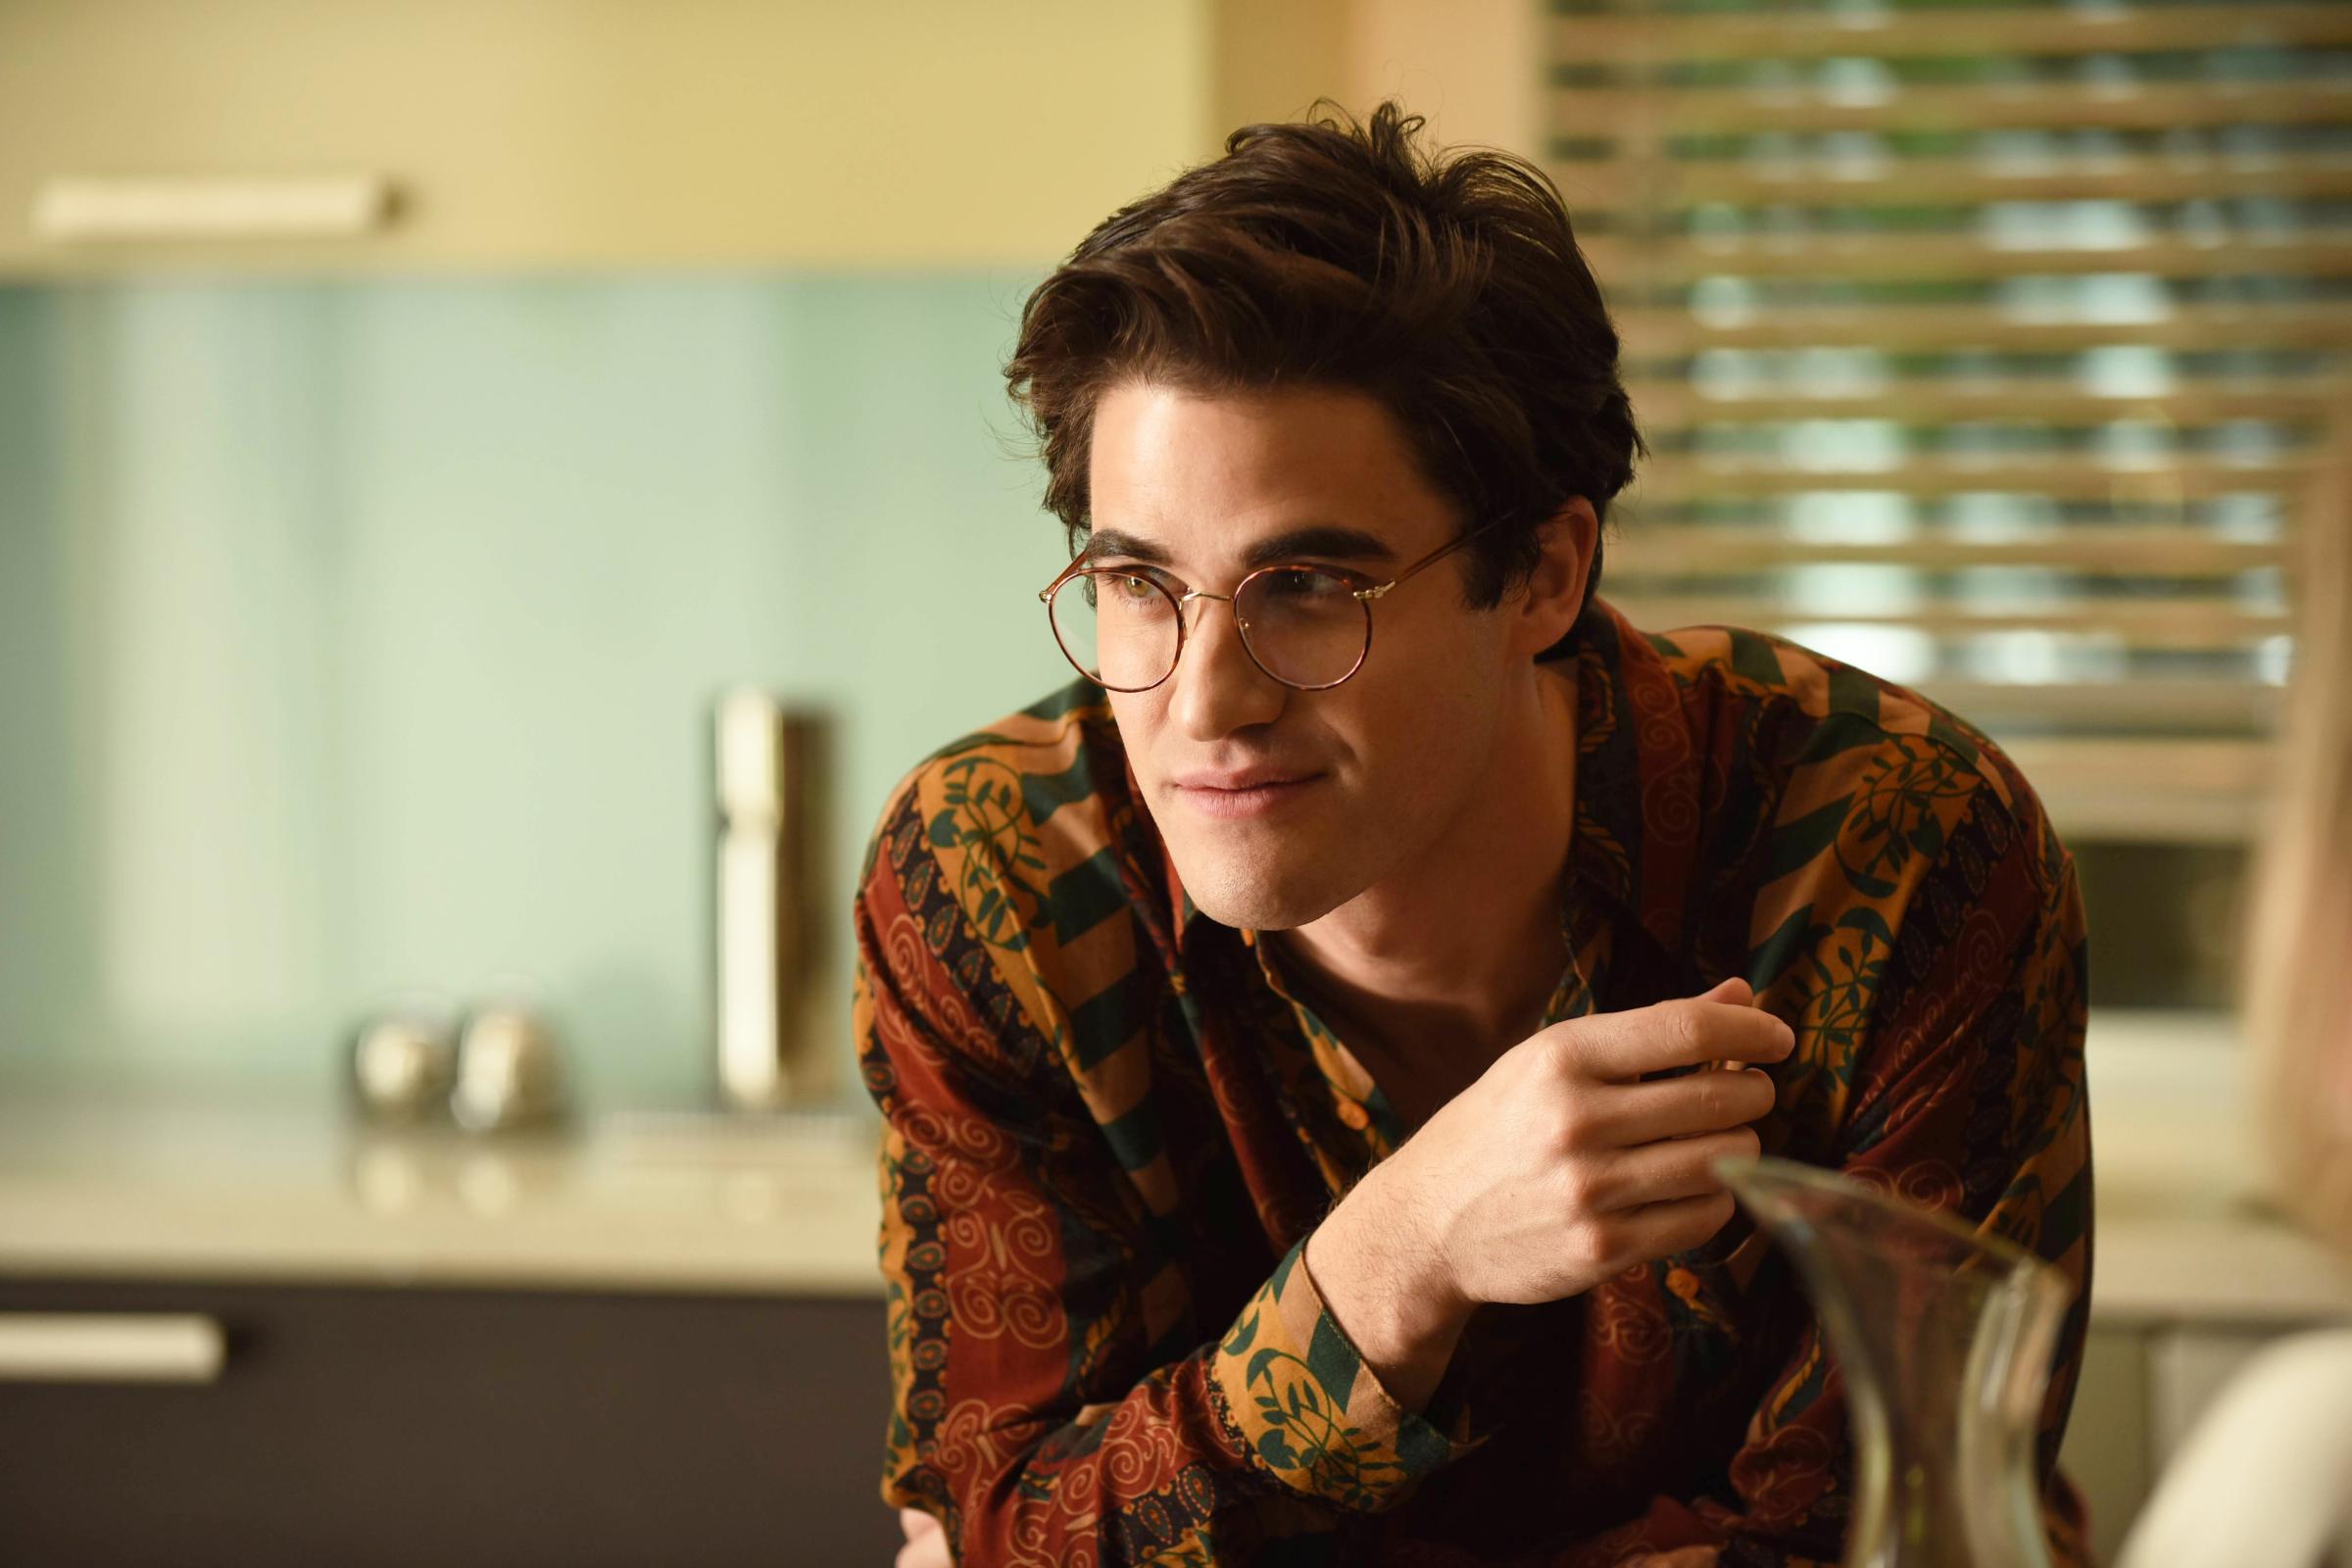 THE ASSASSINATION OF GIANNI VERSACE: AMERICAN CRIME STORY "The Man Who Would Be Vogue" Episode 1 (Airs Wednesday. January 17, 10:00 p.m. e/p) -- Pictured: Darren Criss as Andrew Cunanan. CR: Ray Mickshaw/FX